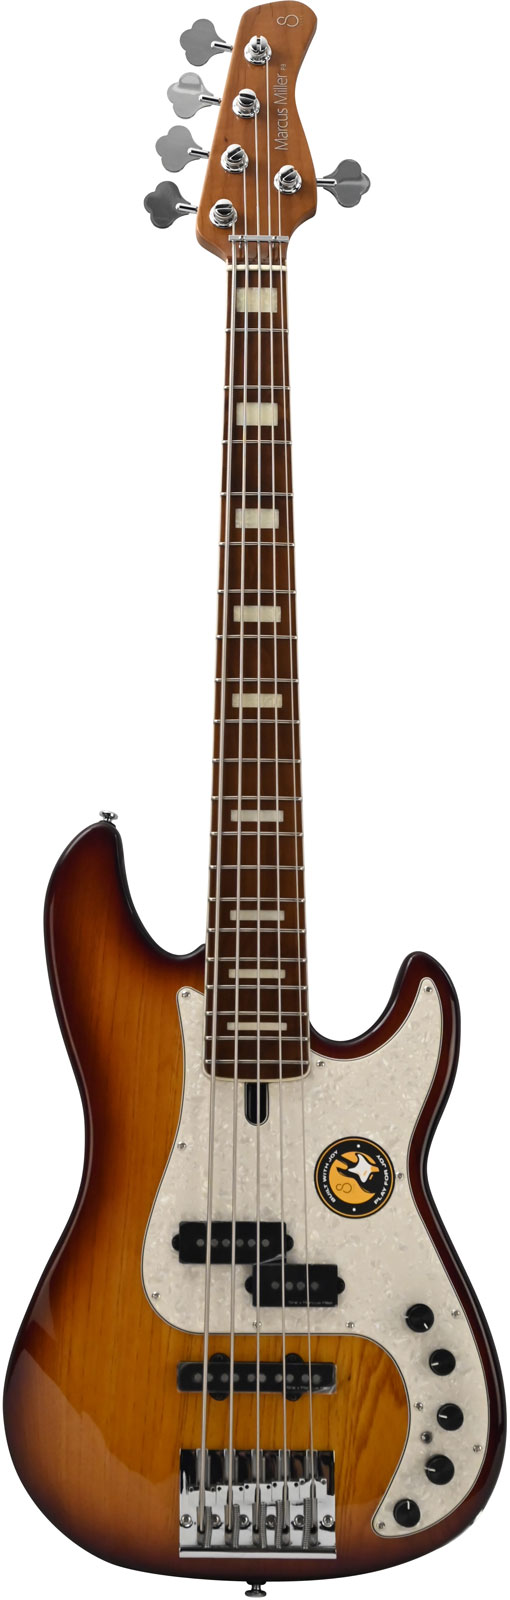 SIRE MARCUS MILLER P8 SWAMP ASH-5 TS MN + HOUSSE